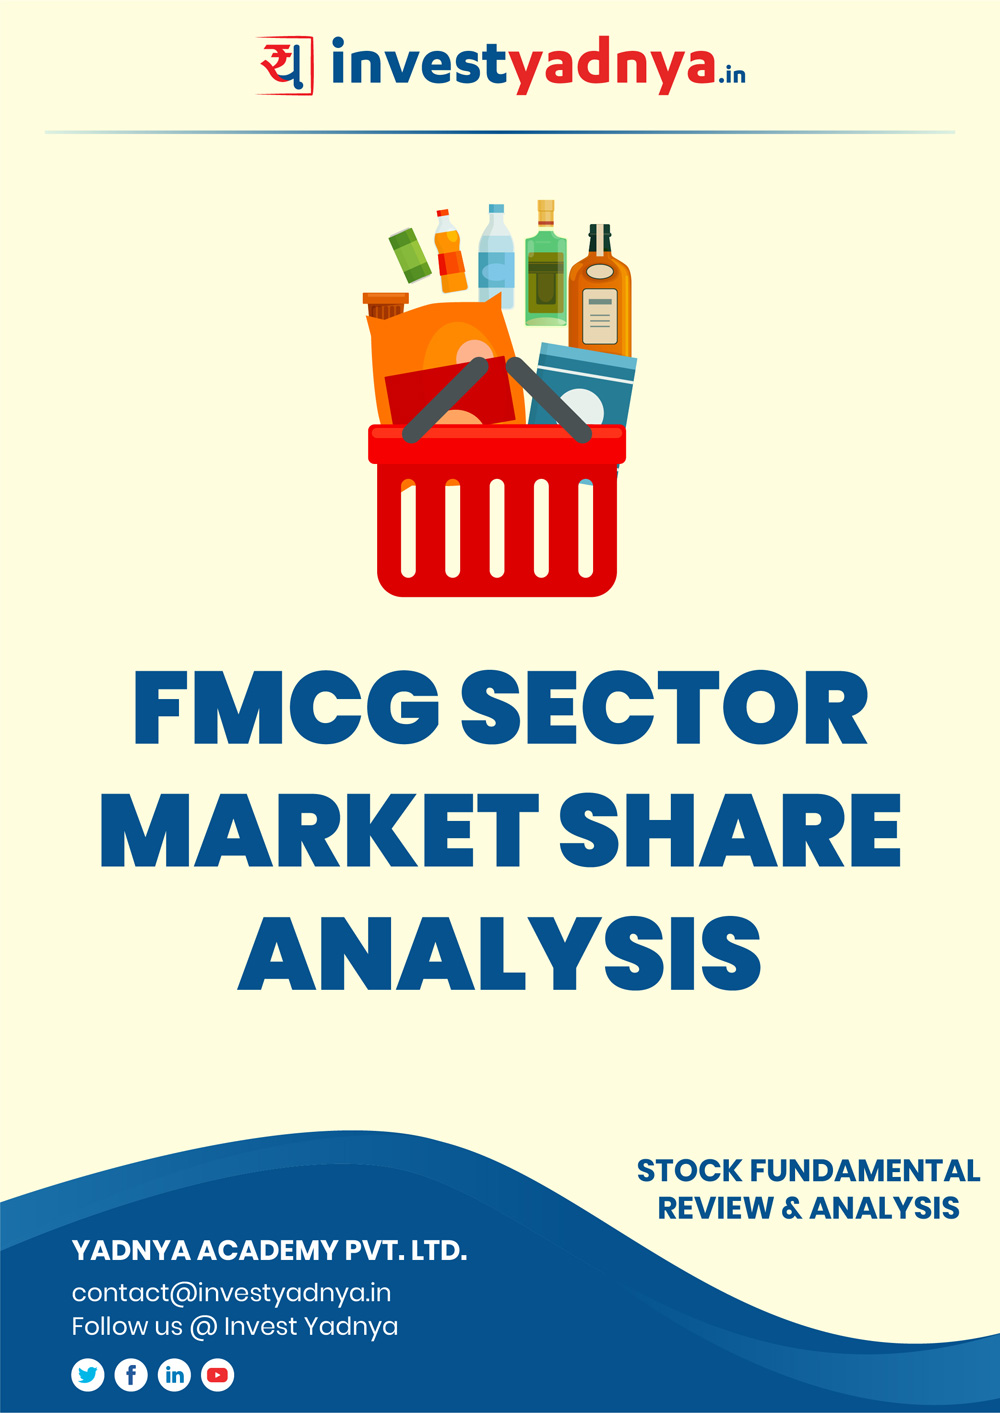 Learn in detail about FMCG Sector Market Share Analysis in this eBook from Investyadna. Find information about the Sector Segmentation, Rural-Urban Industry Breakup, Sub-Sector Players etc. ✔ Sector Segmentation Analysis ✔ Detailed Company Analysis ✔ Latest Reviews.